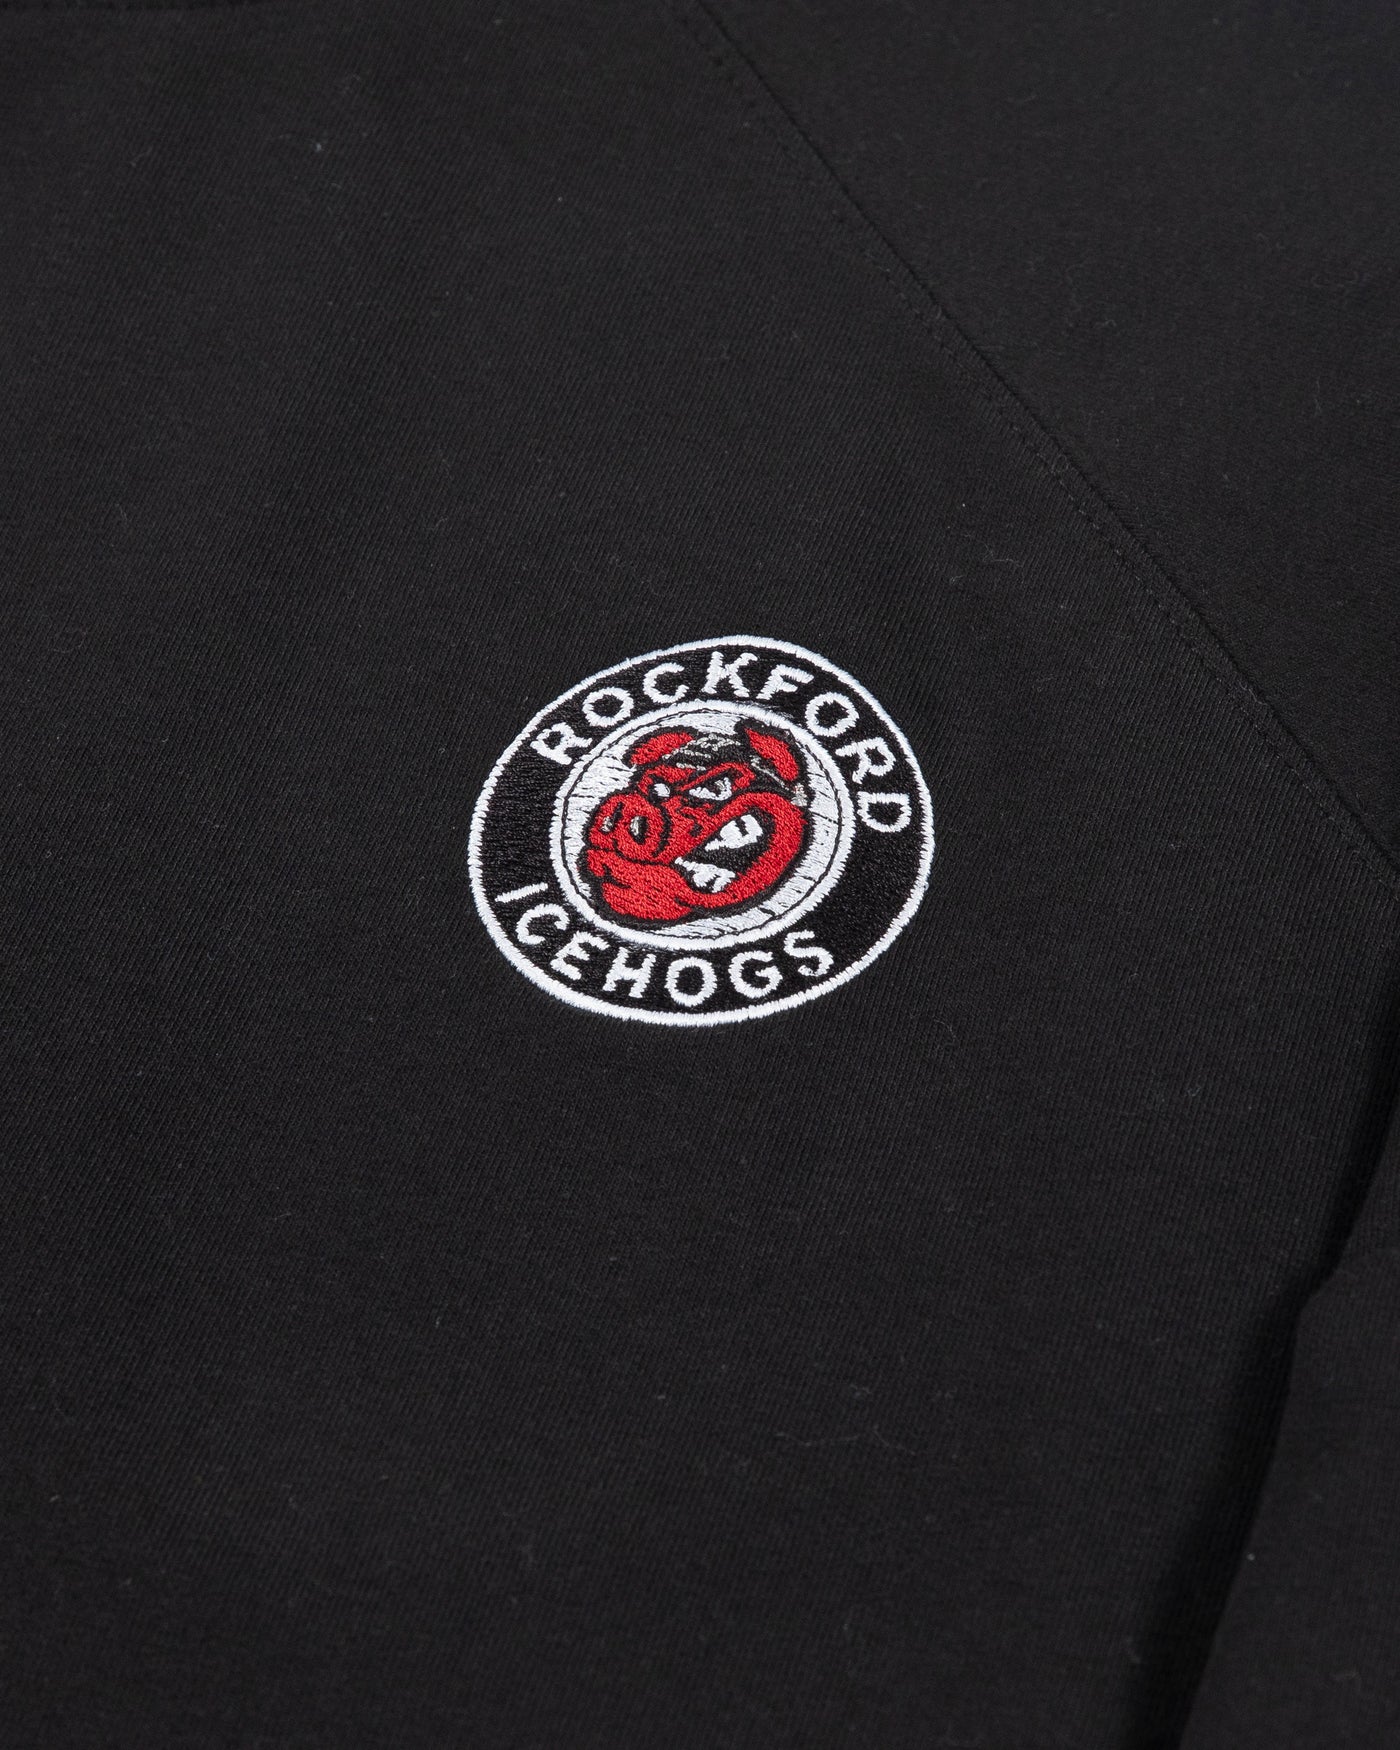 Black Rockford IceHogs crewneck with embroidered logo on left chest and embroidered wordmark on left cuff - detail lay flat